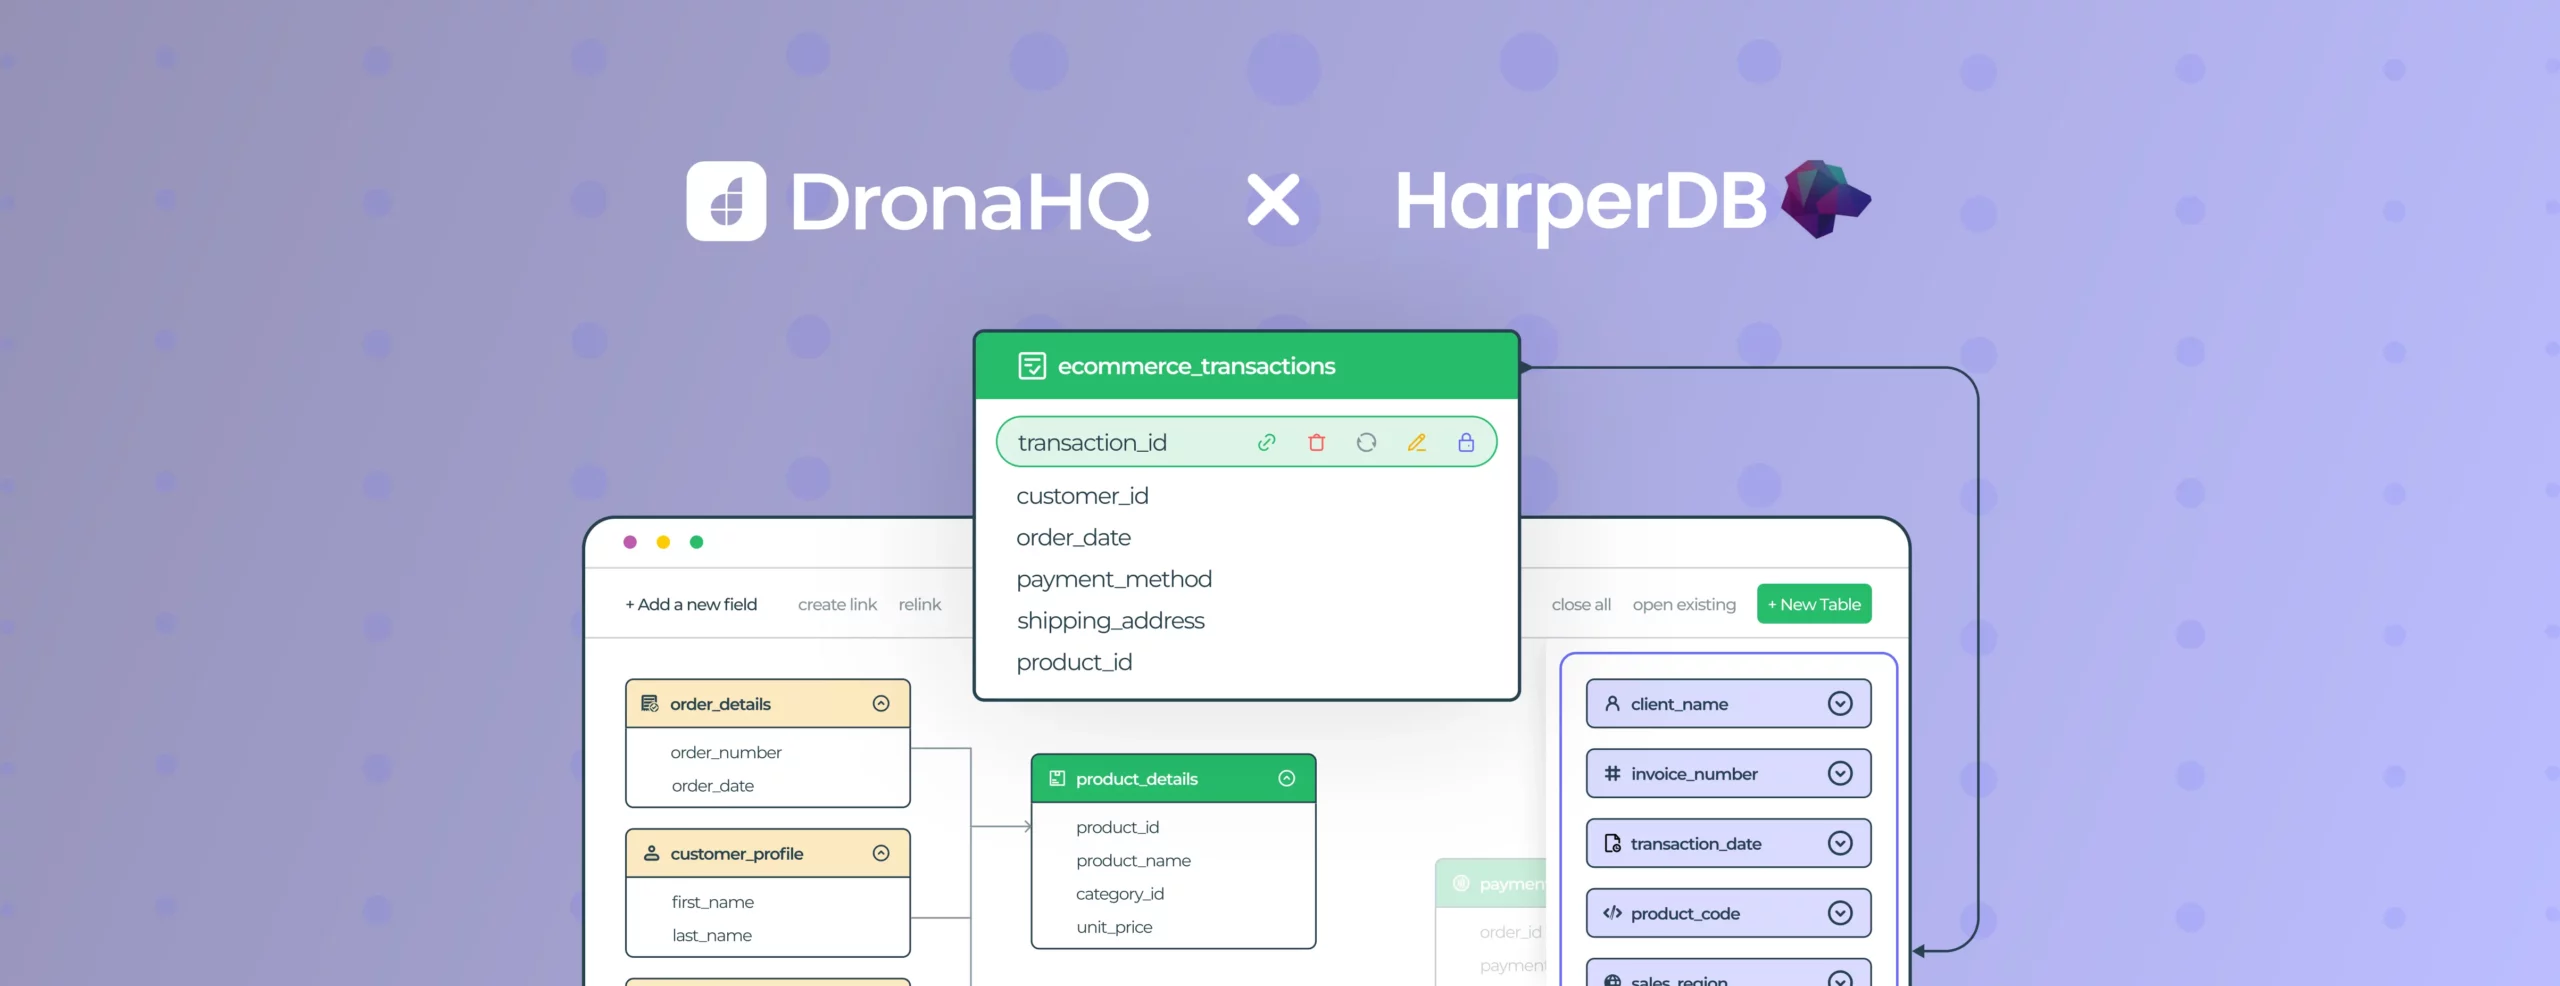 Building Inventory tool on HarperDB using DronaHQ